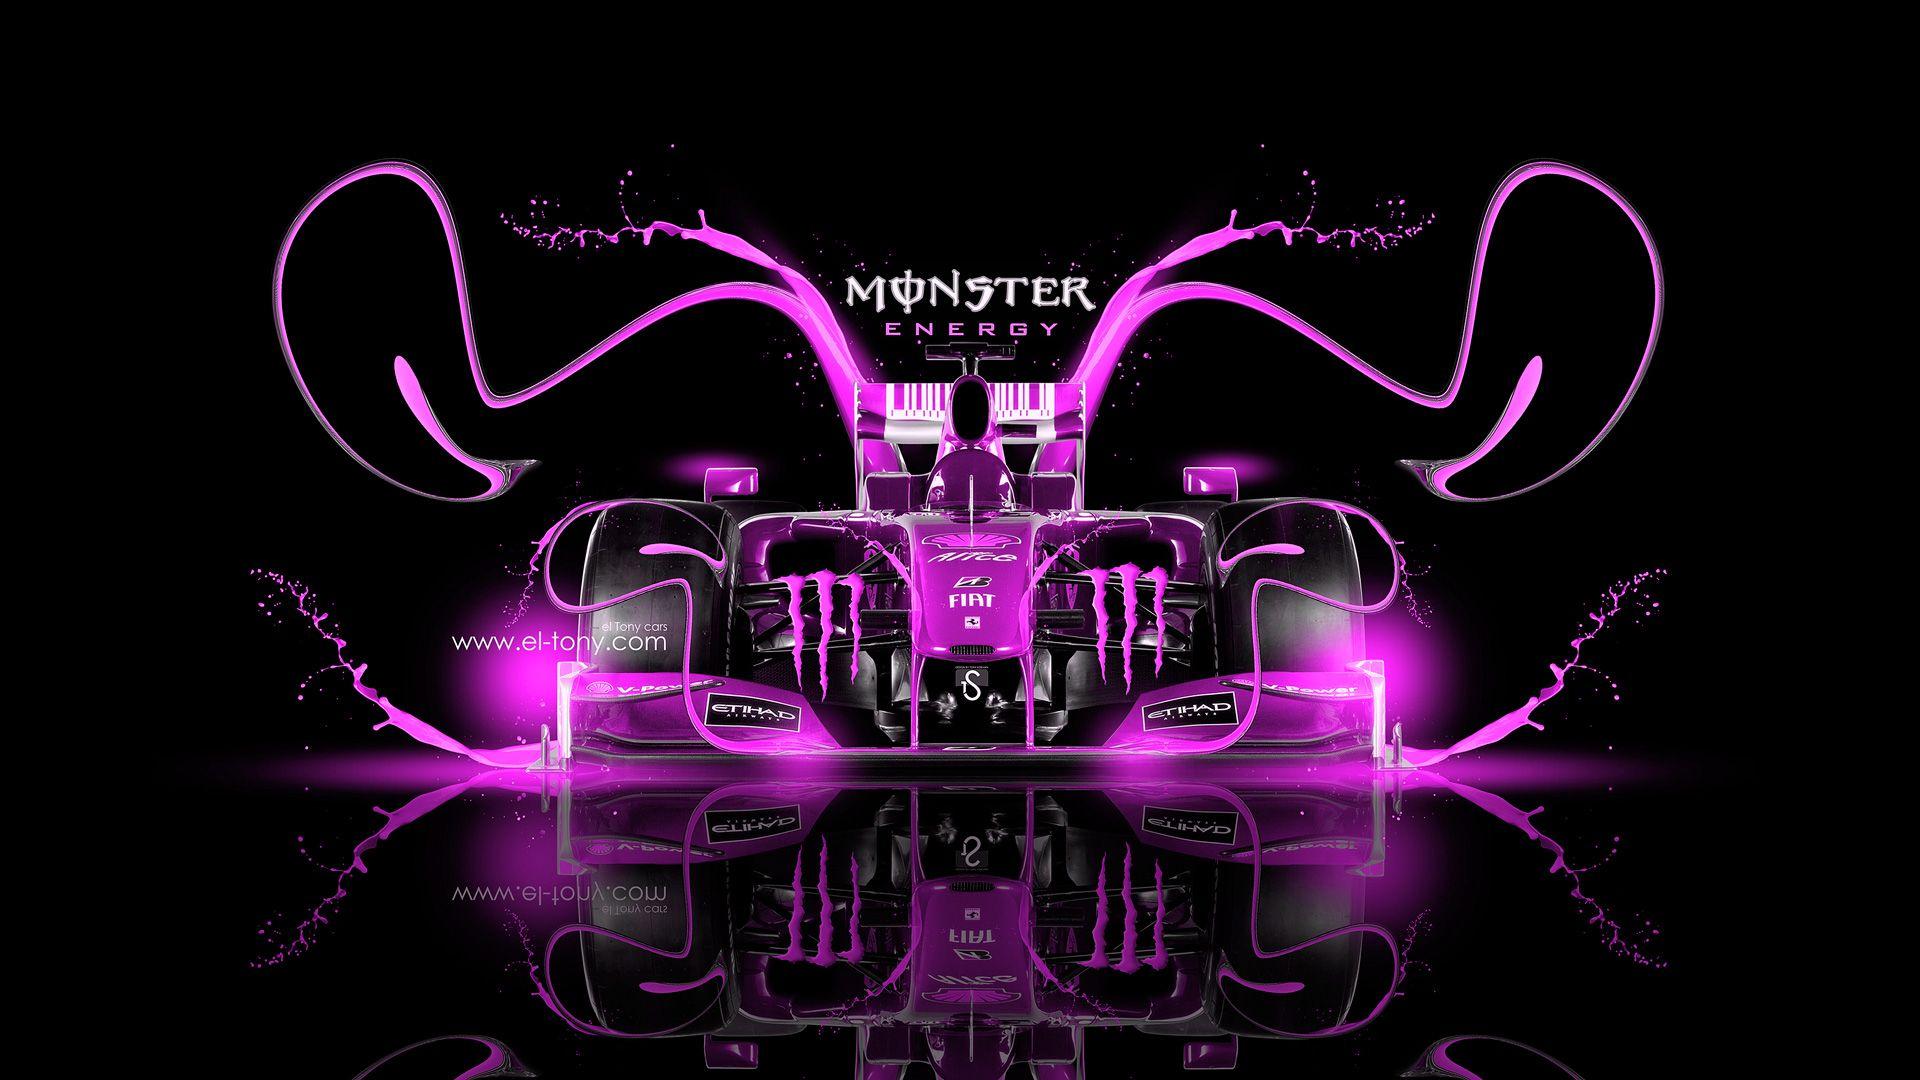 Pink Monster Energy Logo - Monster Energy Wallpapers, Pictures, Images